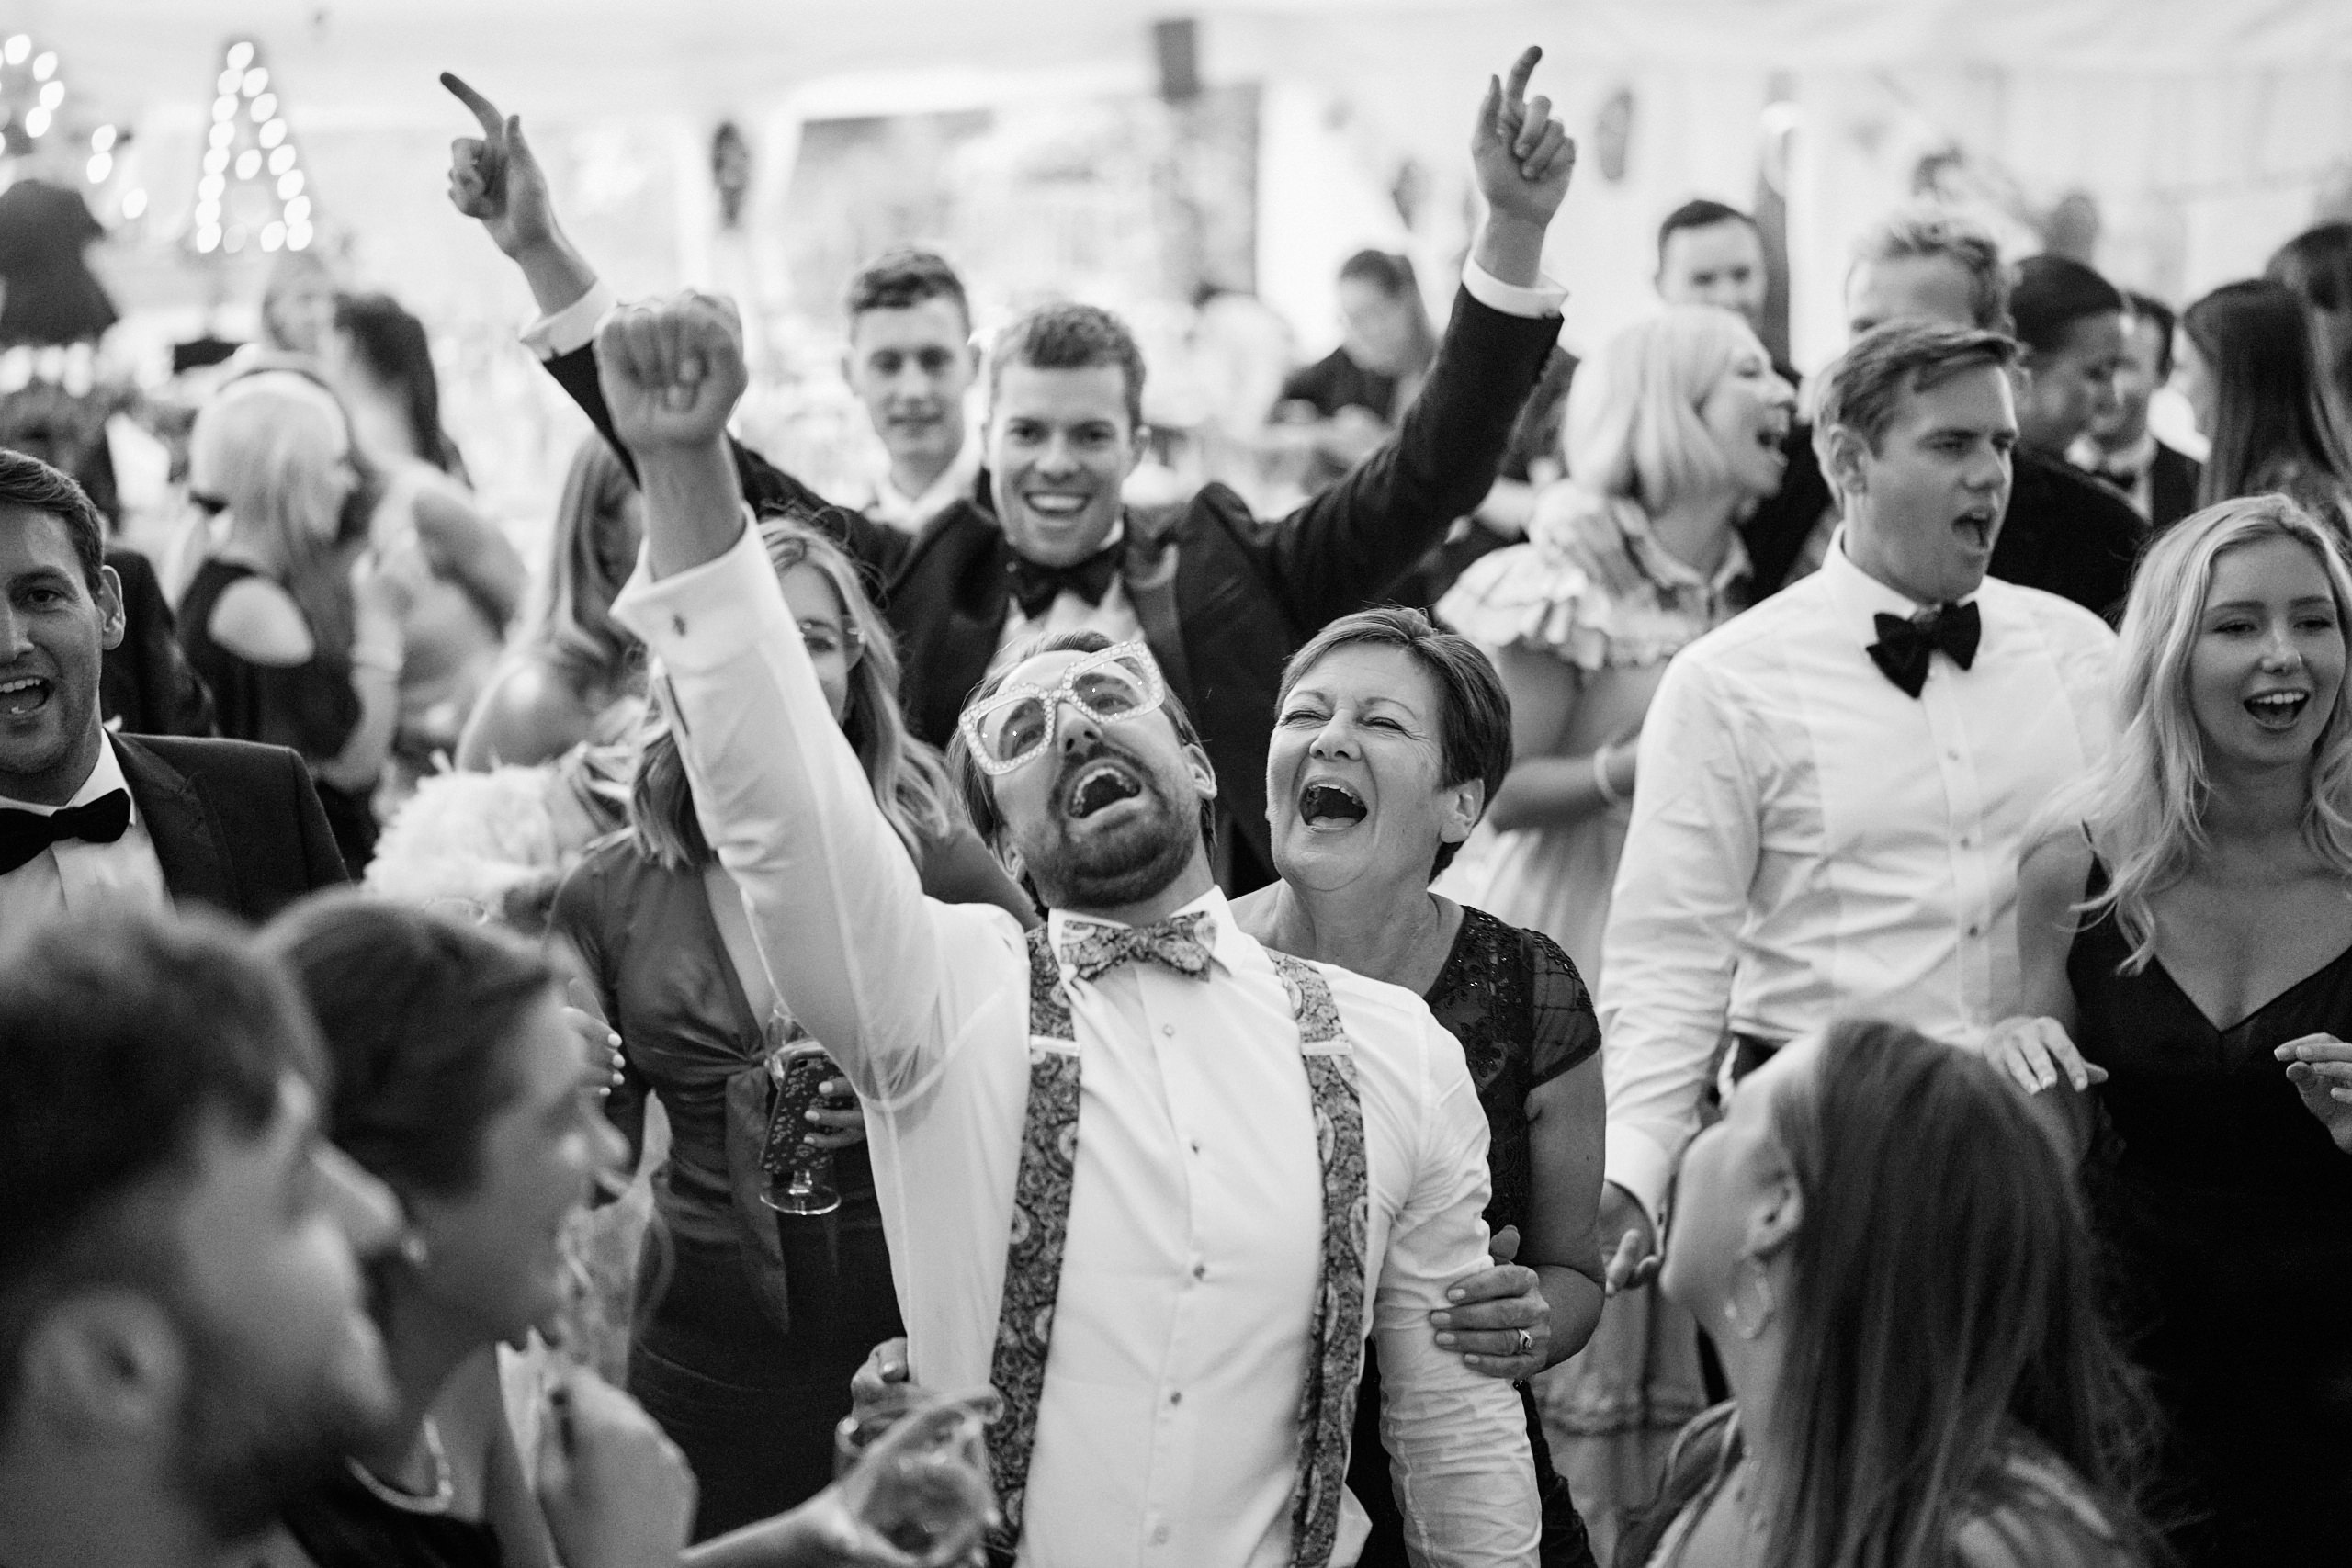 A picture in black and white of some folks dancing at a wedding.